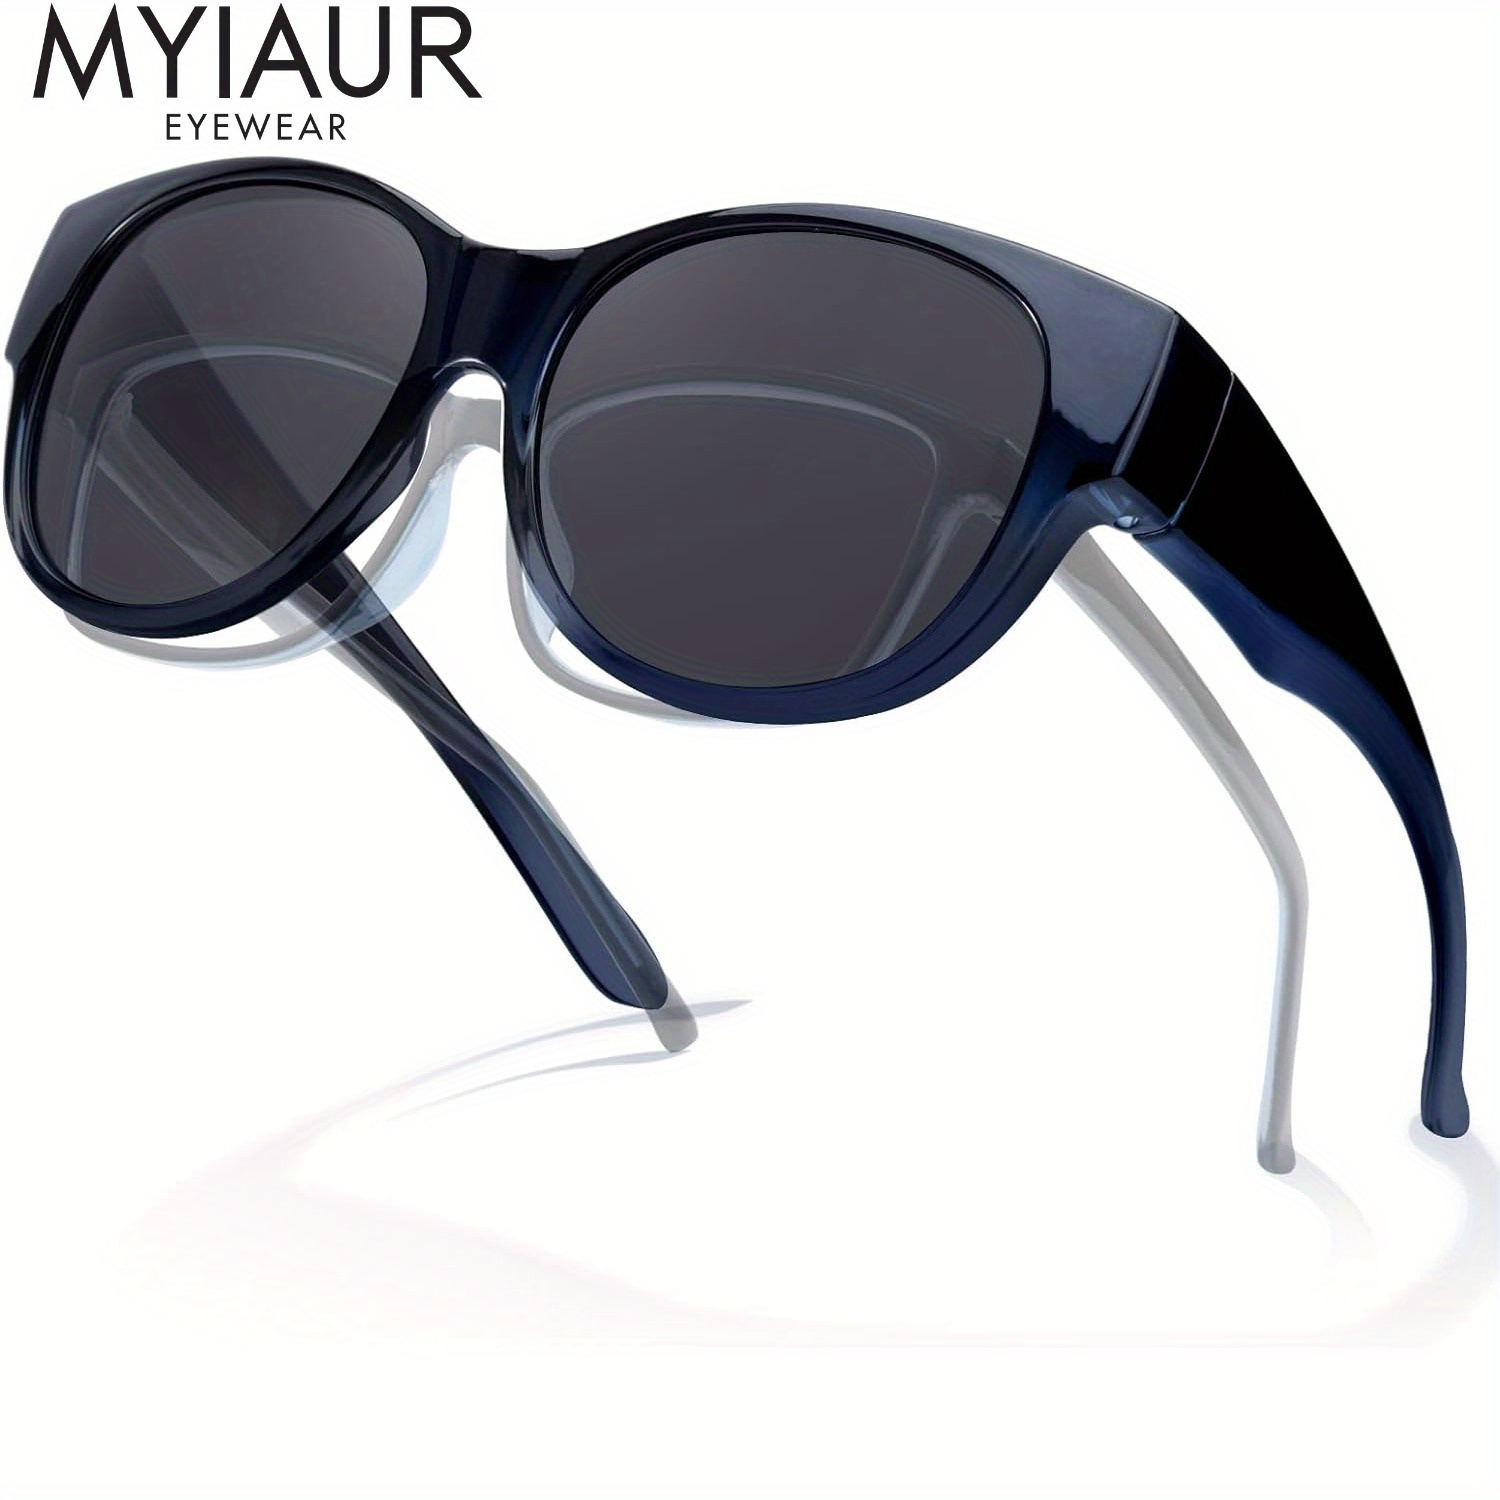 

Myiaur Polarized Fit Over Glasses Sunglasses For Women, Trendy Wear Over Glasses For Driving With Uv400 Protection